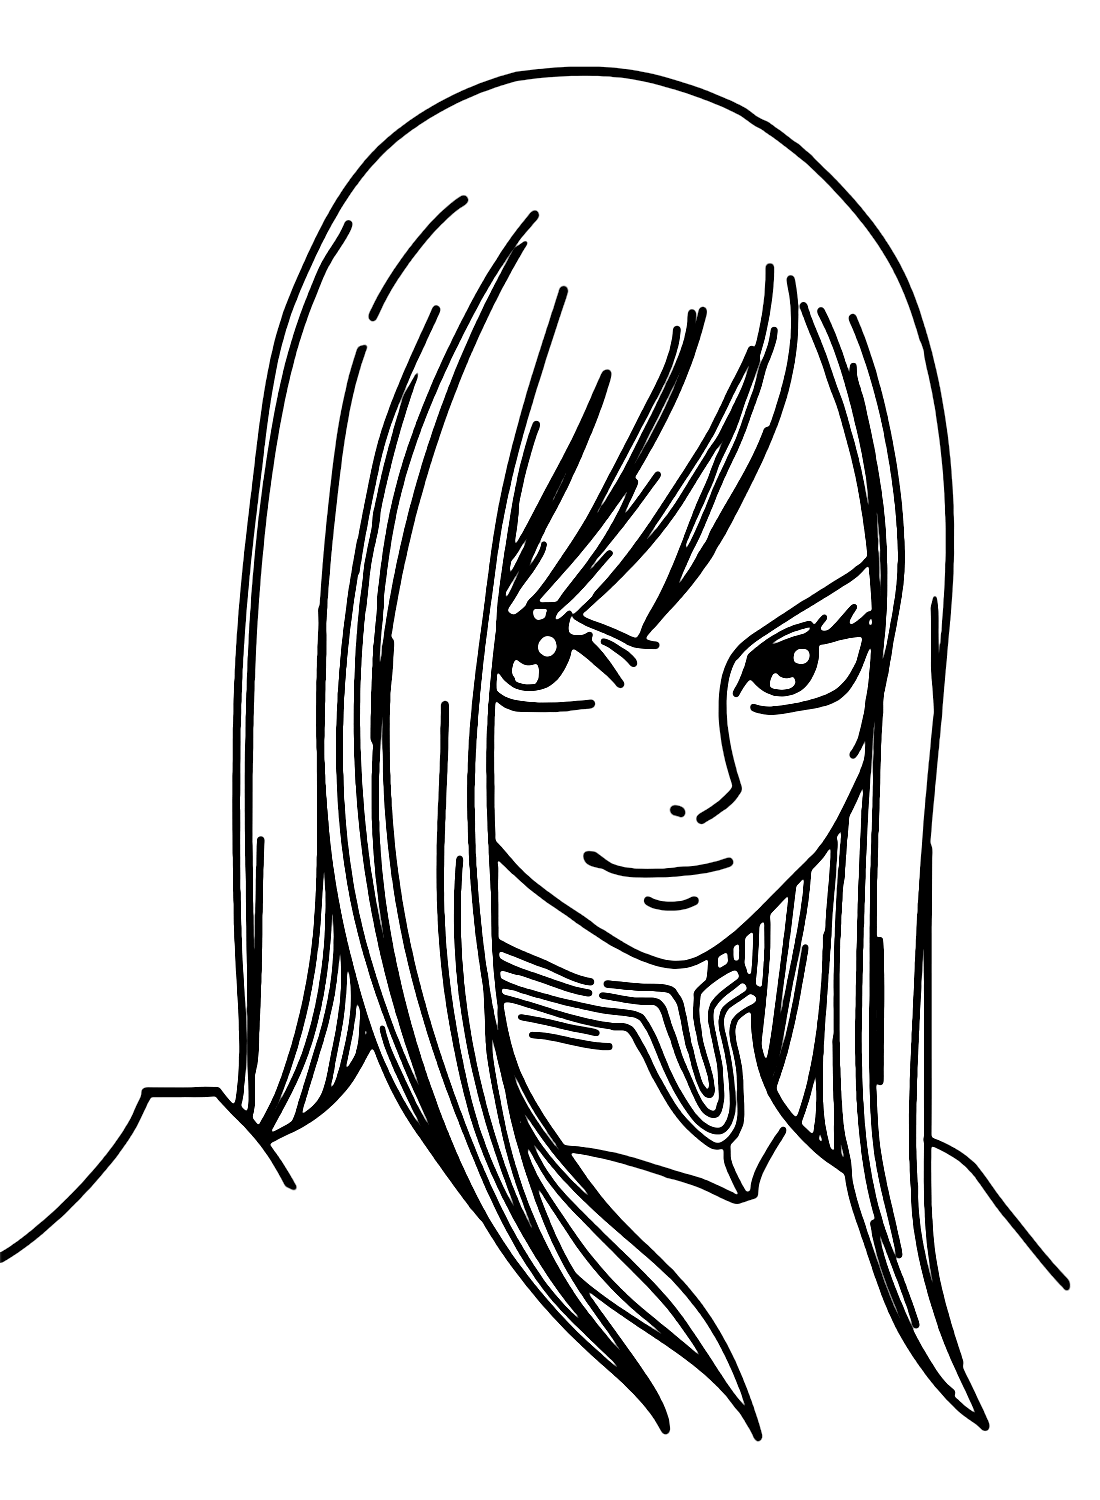 Free Printable Erza Scarlet Coloring Page from Erza Scarlet